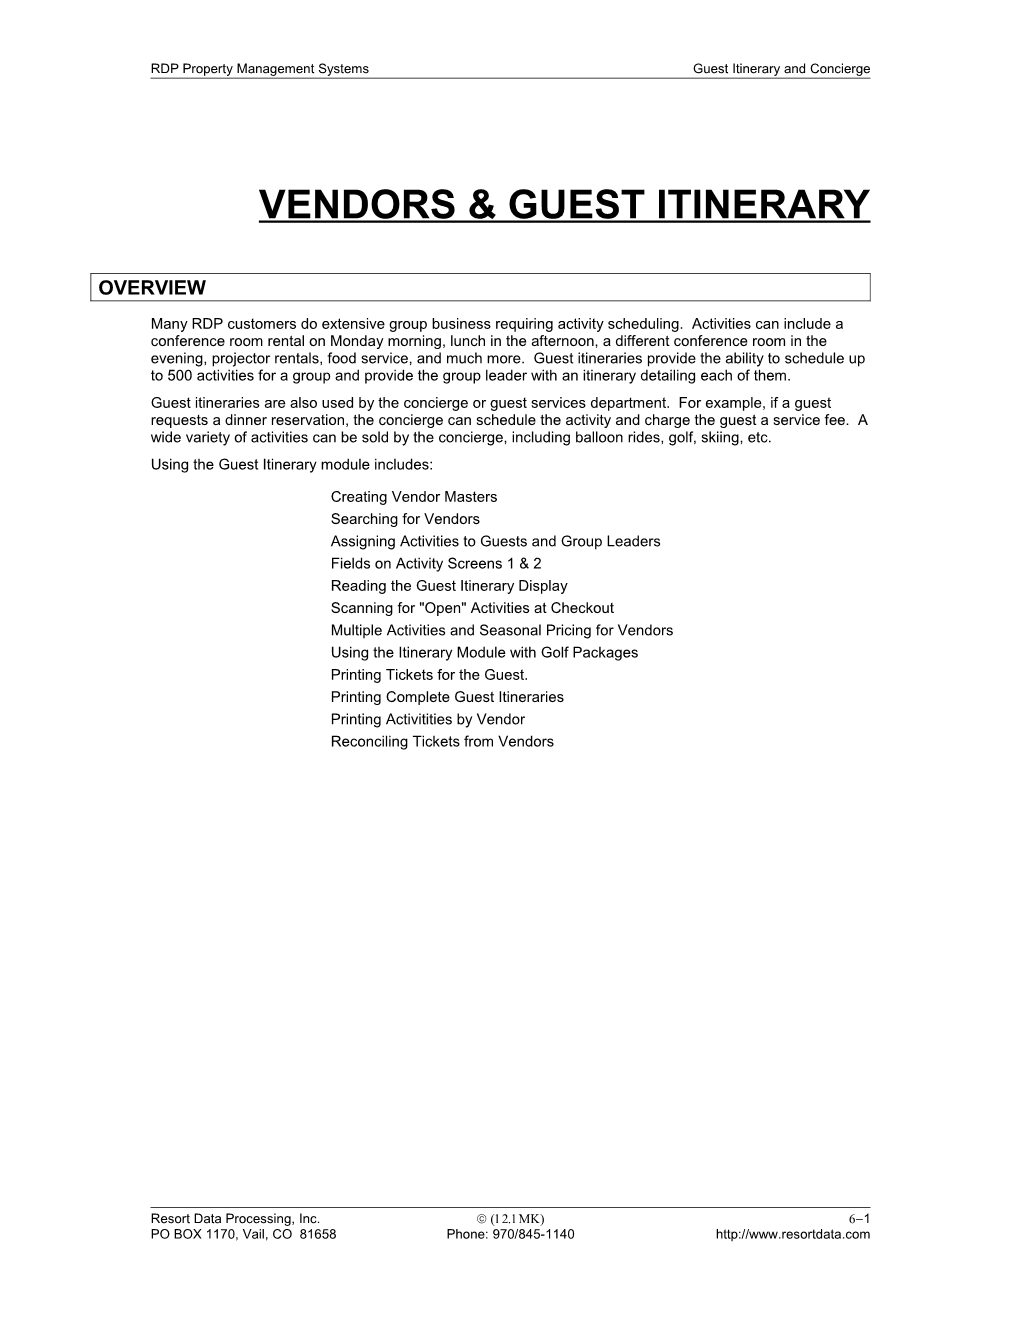 Guest Itineraries/Concierge